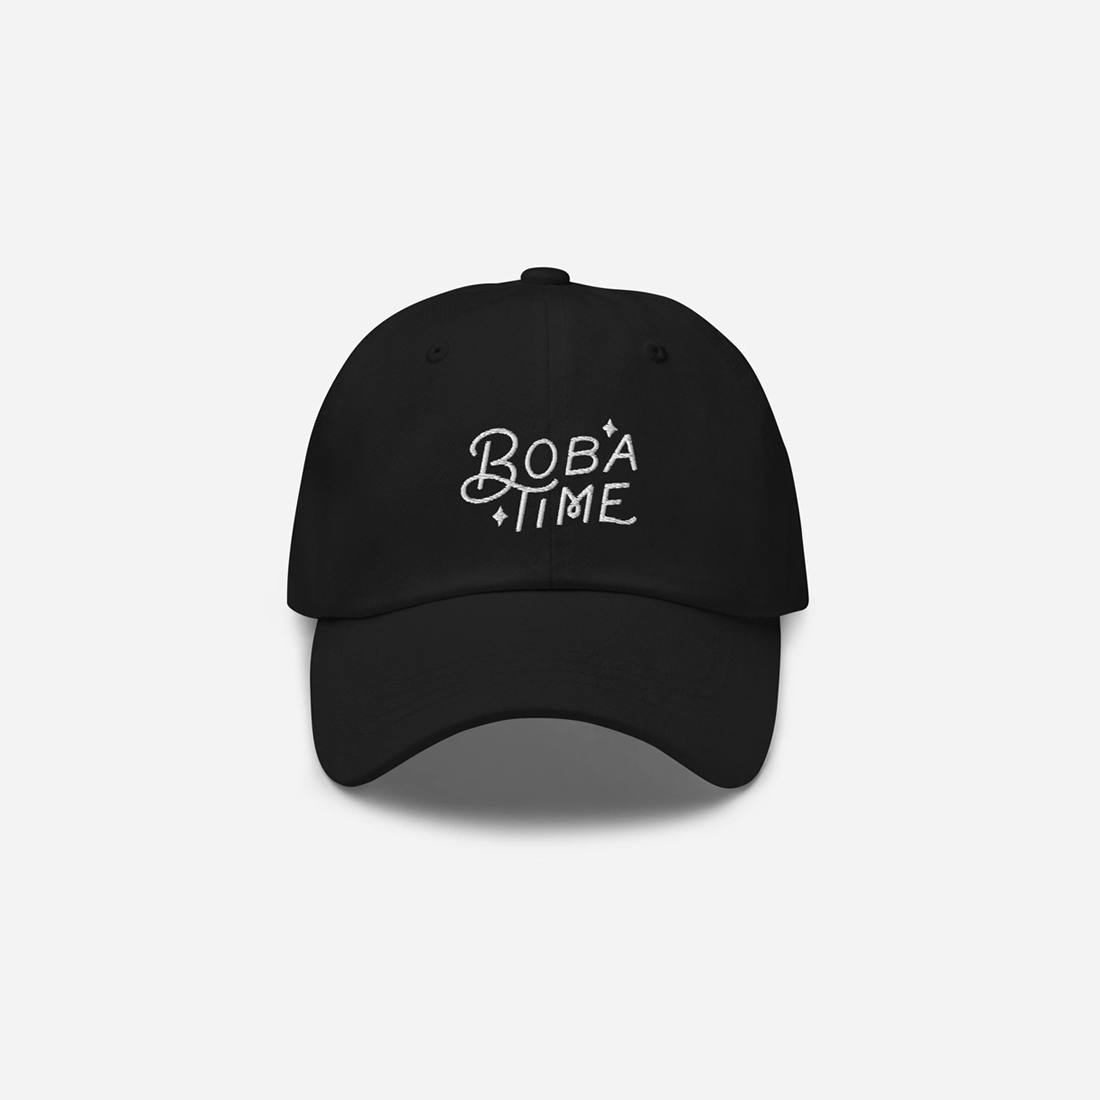 Boba Time embroidered hat